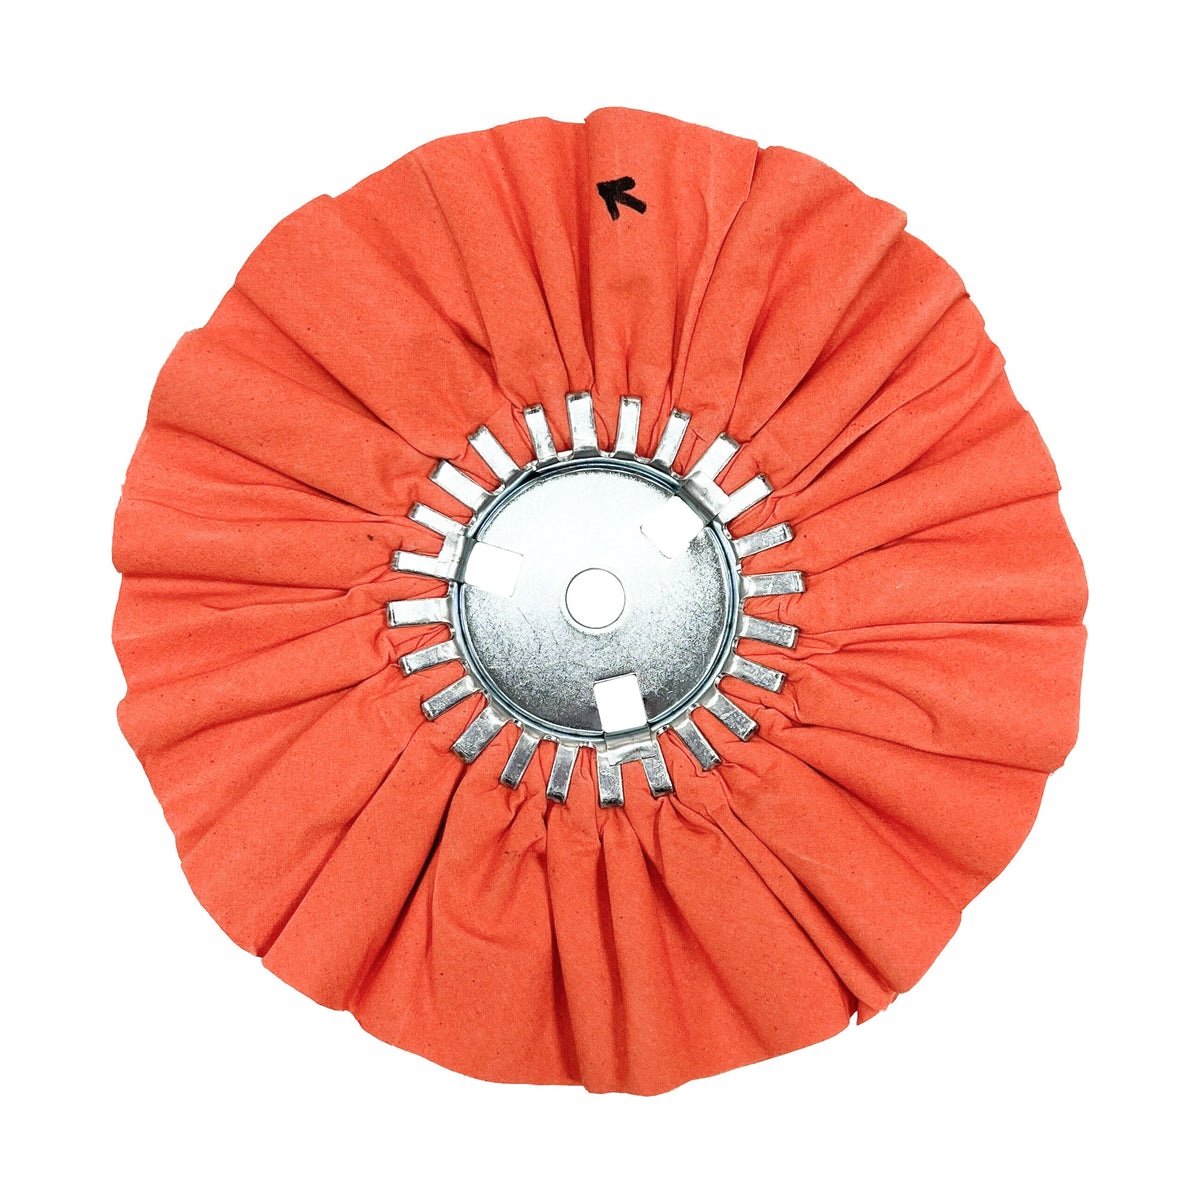 Renegade Products 9 x 3 x 5/8 Airway Buffing Wheel for Metal Polishing Aluminum & Stainless Steel for Wheels, Tanks & Bumpers (Orange)